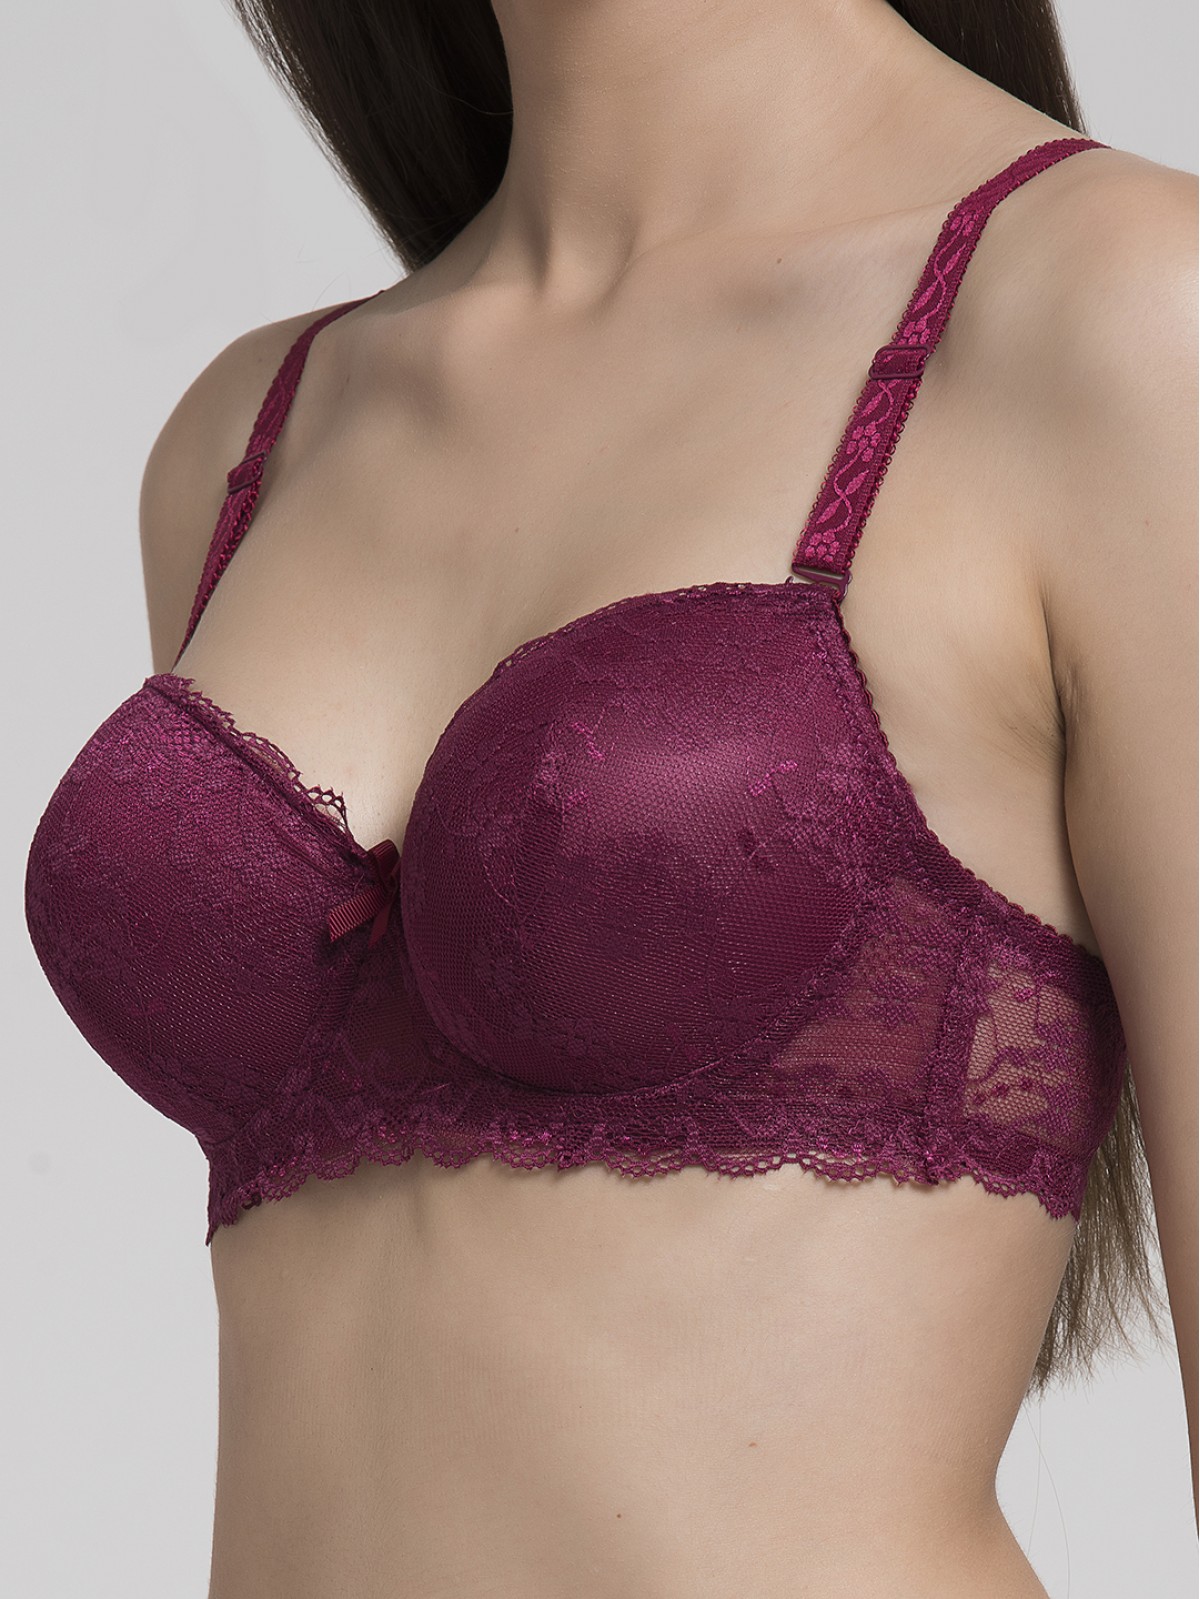 The Cute Charmer Lace Brassiere